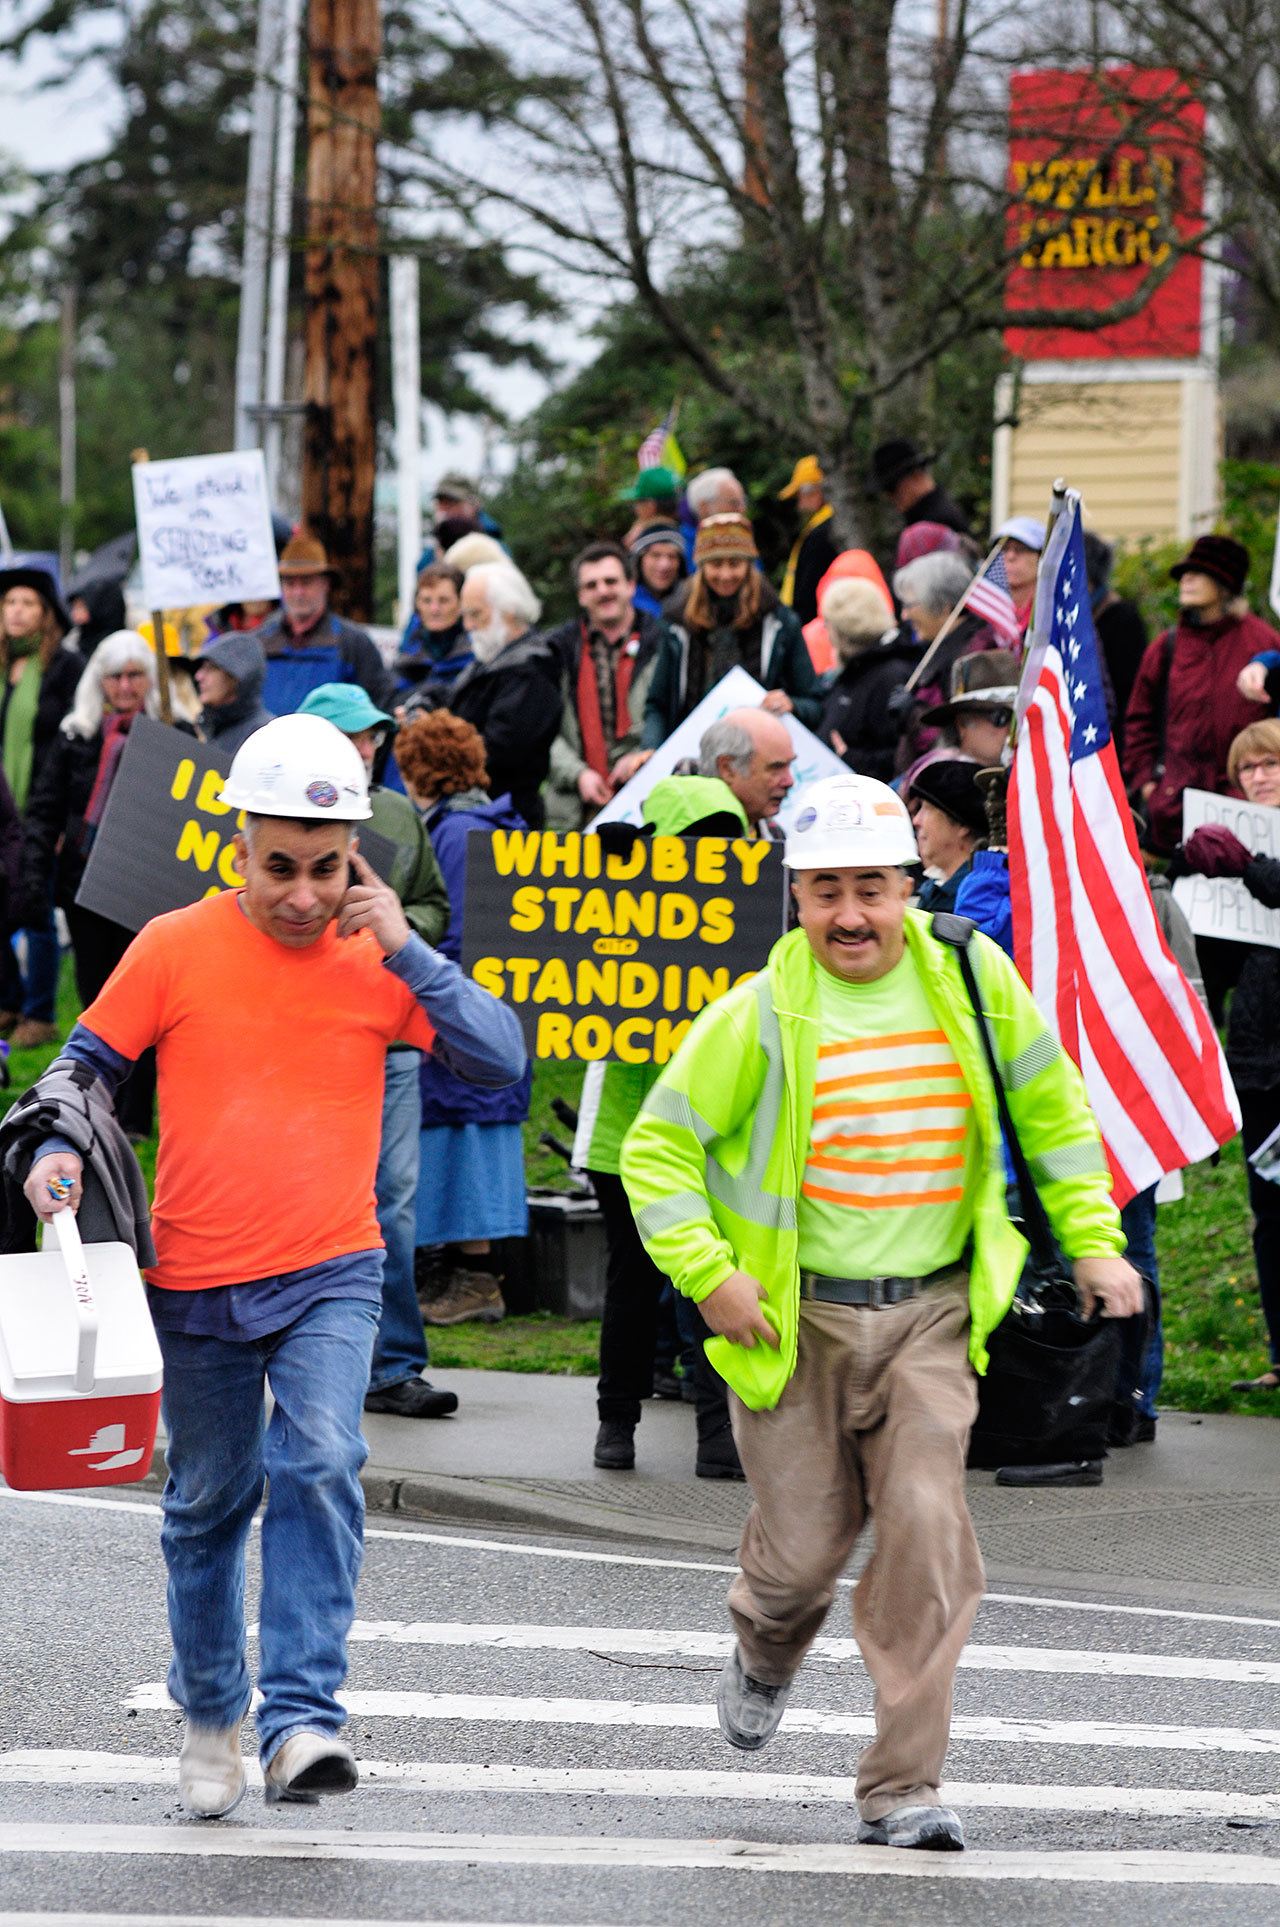 Photo by Michael B. Watkins/Whidbey News-Times                                Construction workers from WhidbeyHealth cross at State Highway 20 in Coupeville as protesters behind them protest the Dakota Access Pipeline stand outside Wells Fargo Bank in Coupeville last week. The group opposes the bank funding the pipeline project and the potential impact to the environment and native people’s land.